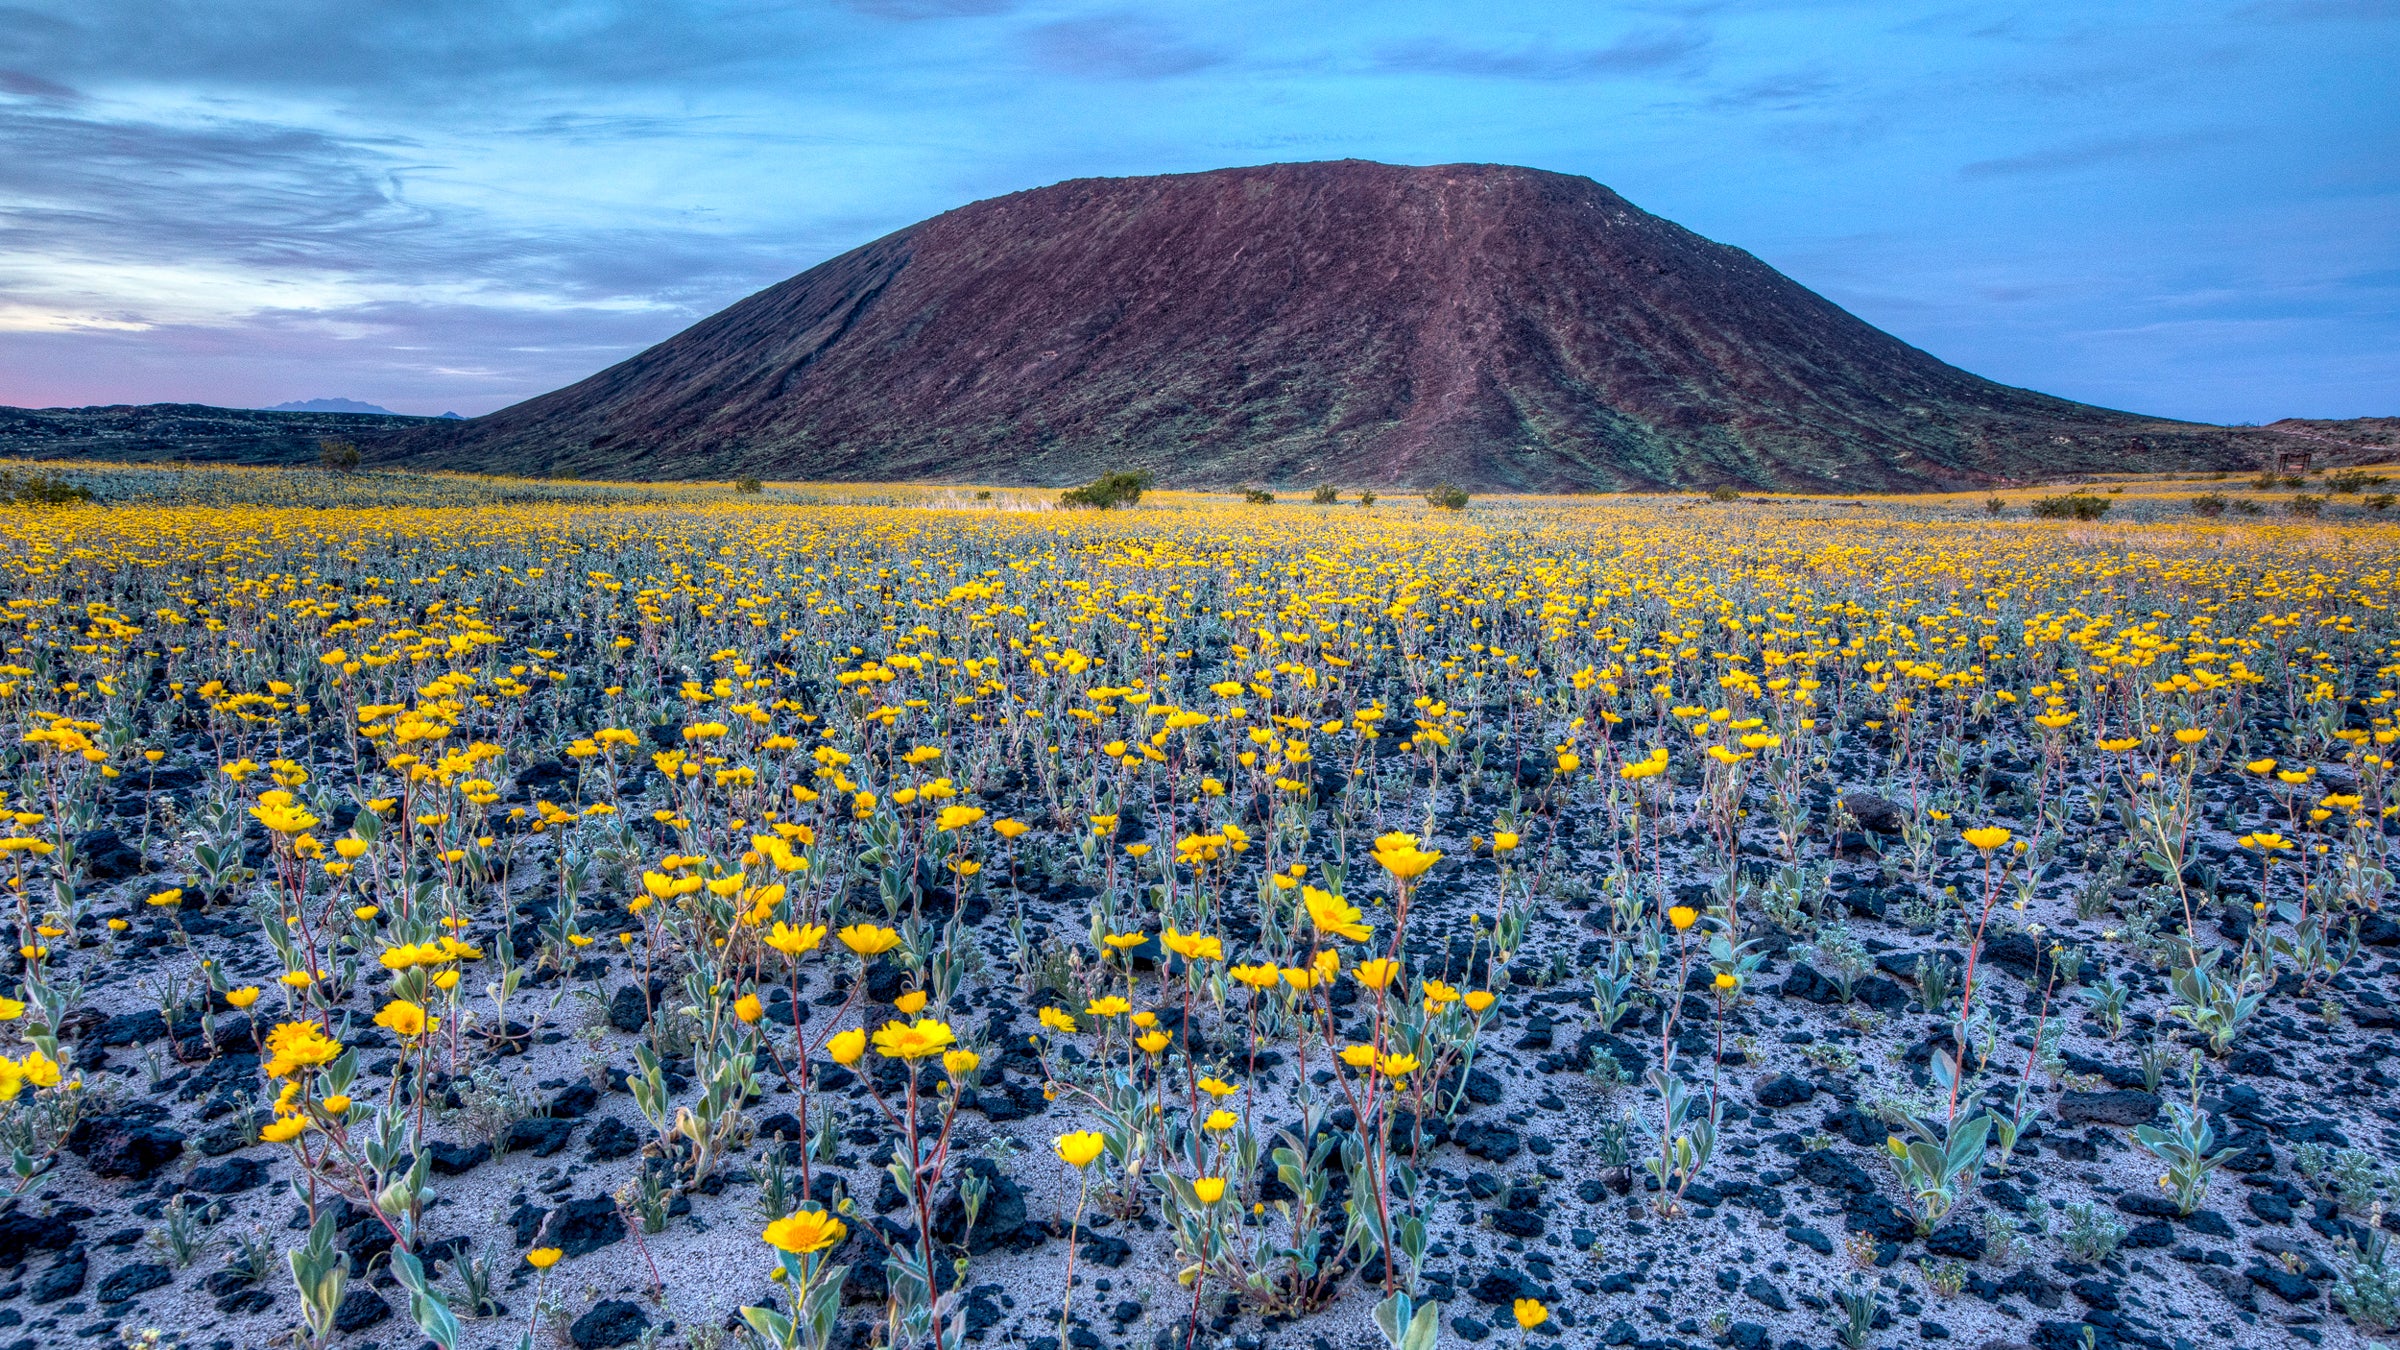 A Field Guide to the Common Wildflowers of the Mojave Desert